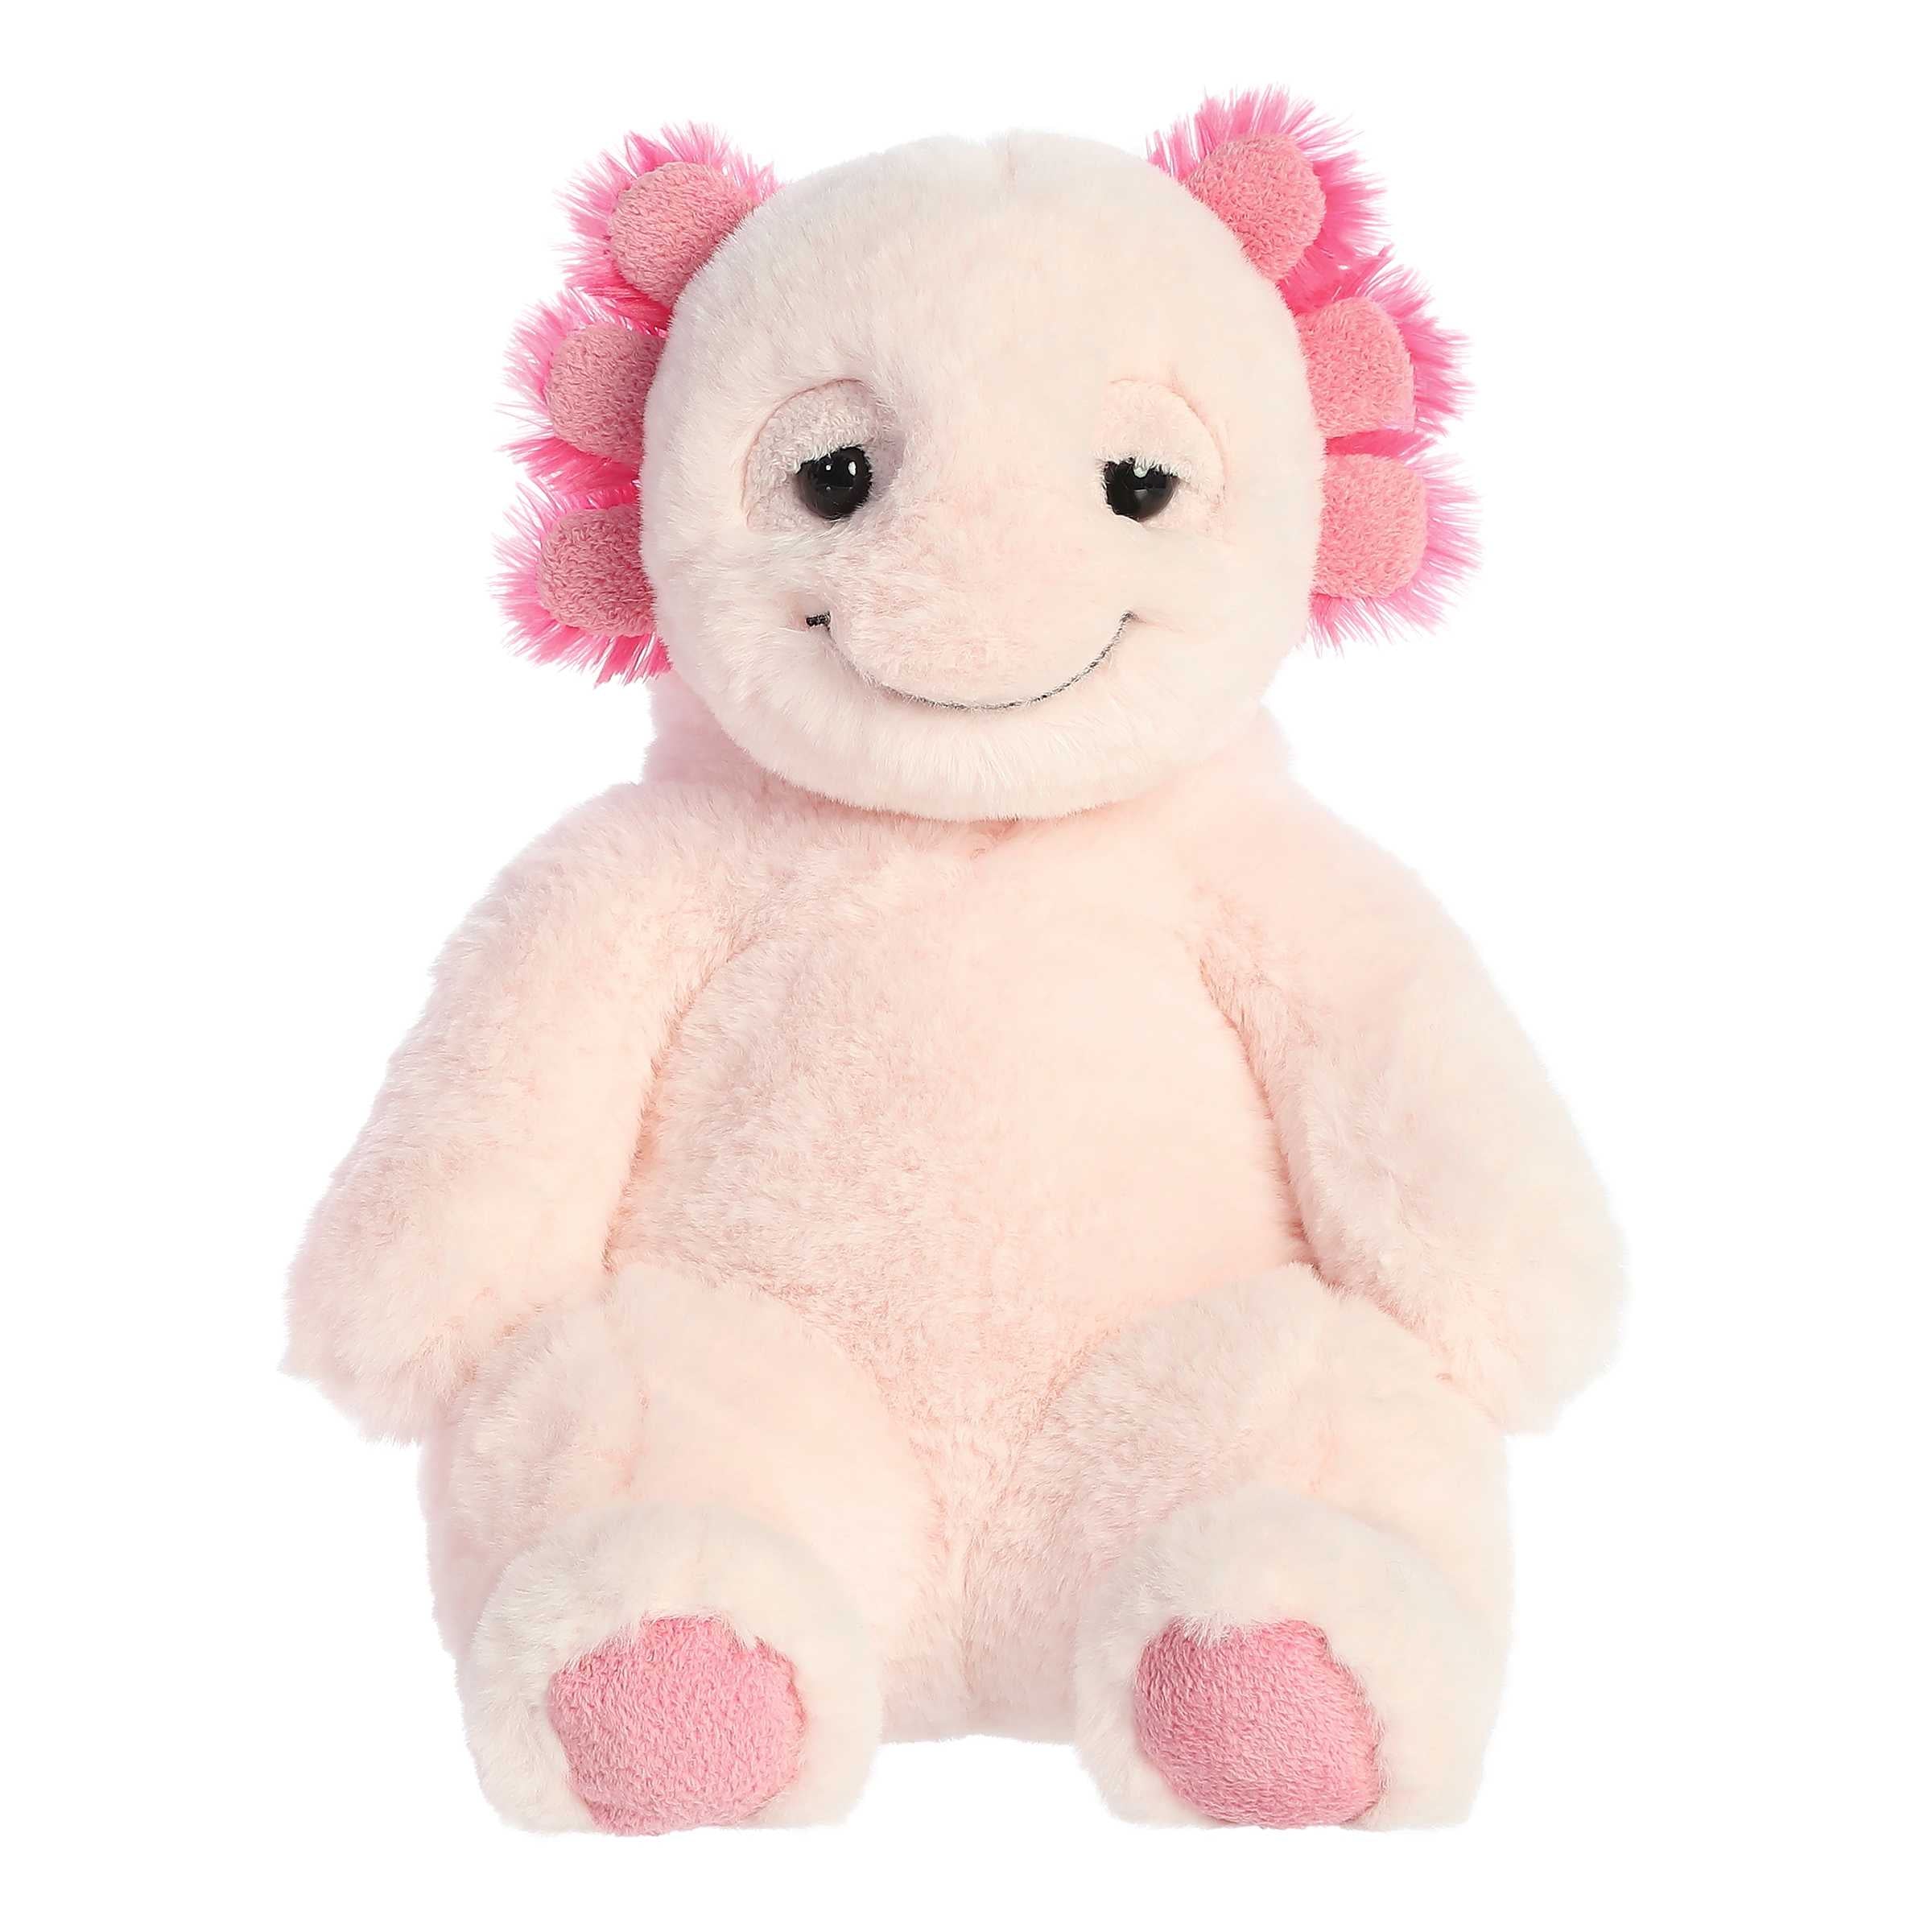 Adorable pink axolotl plush with a relaxed posture and charming expression, made from high-quality, soft materials.